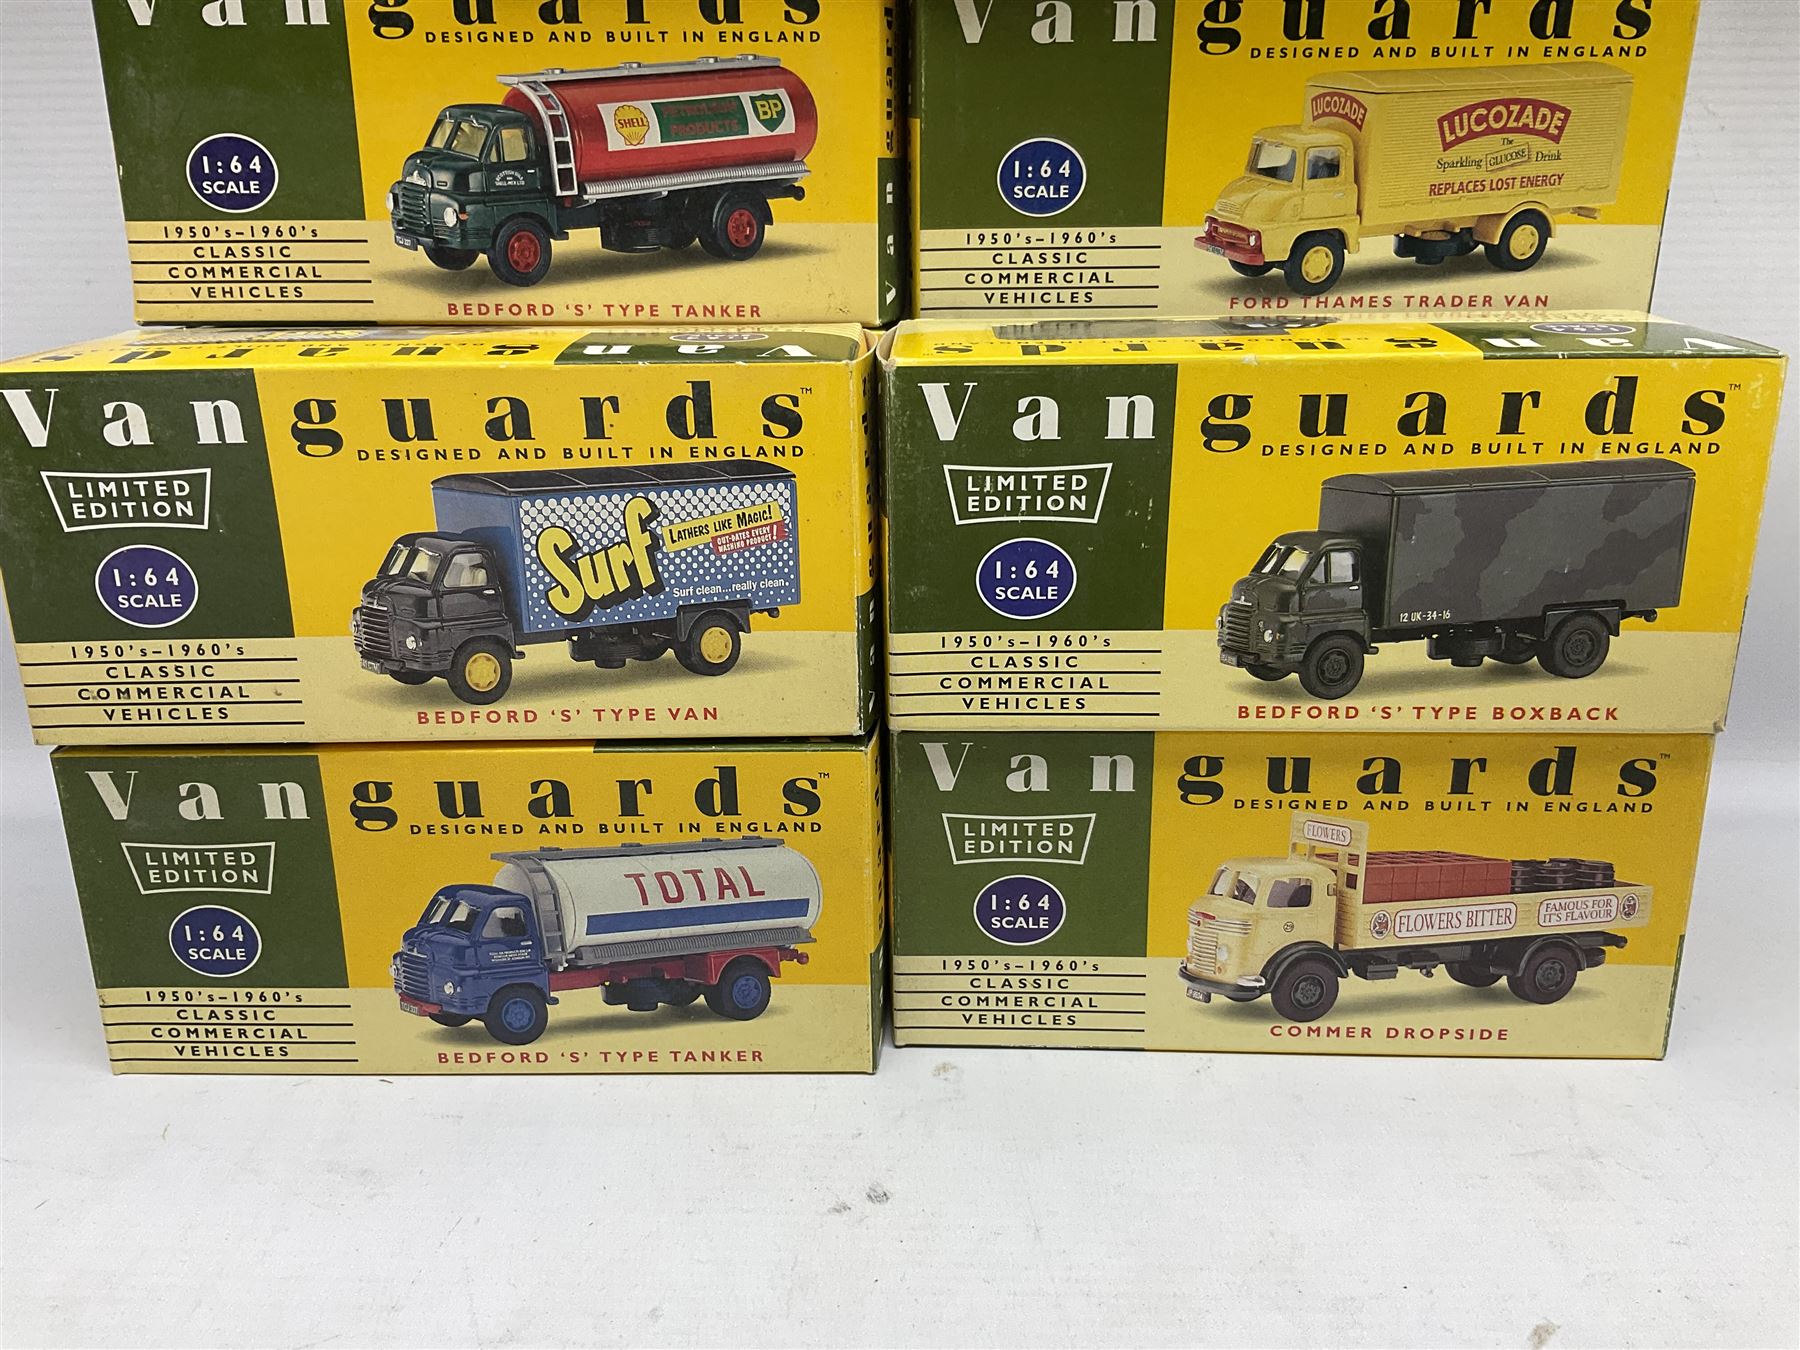 Nineteen Lledo Vanguards 1:64 scale 1950's-1960's Classic Commercial Vehicles die-cast models - Image 4 of 6